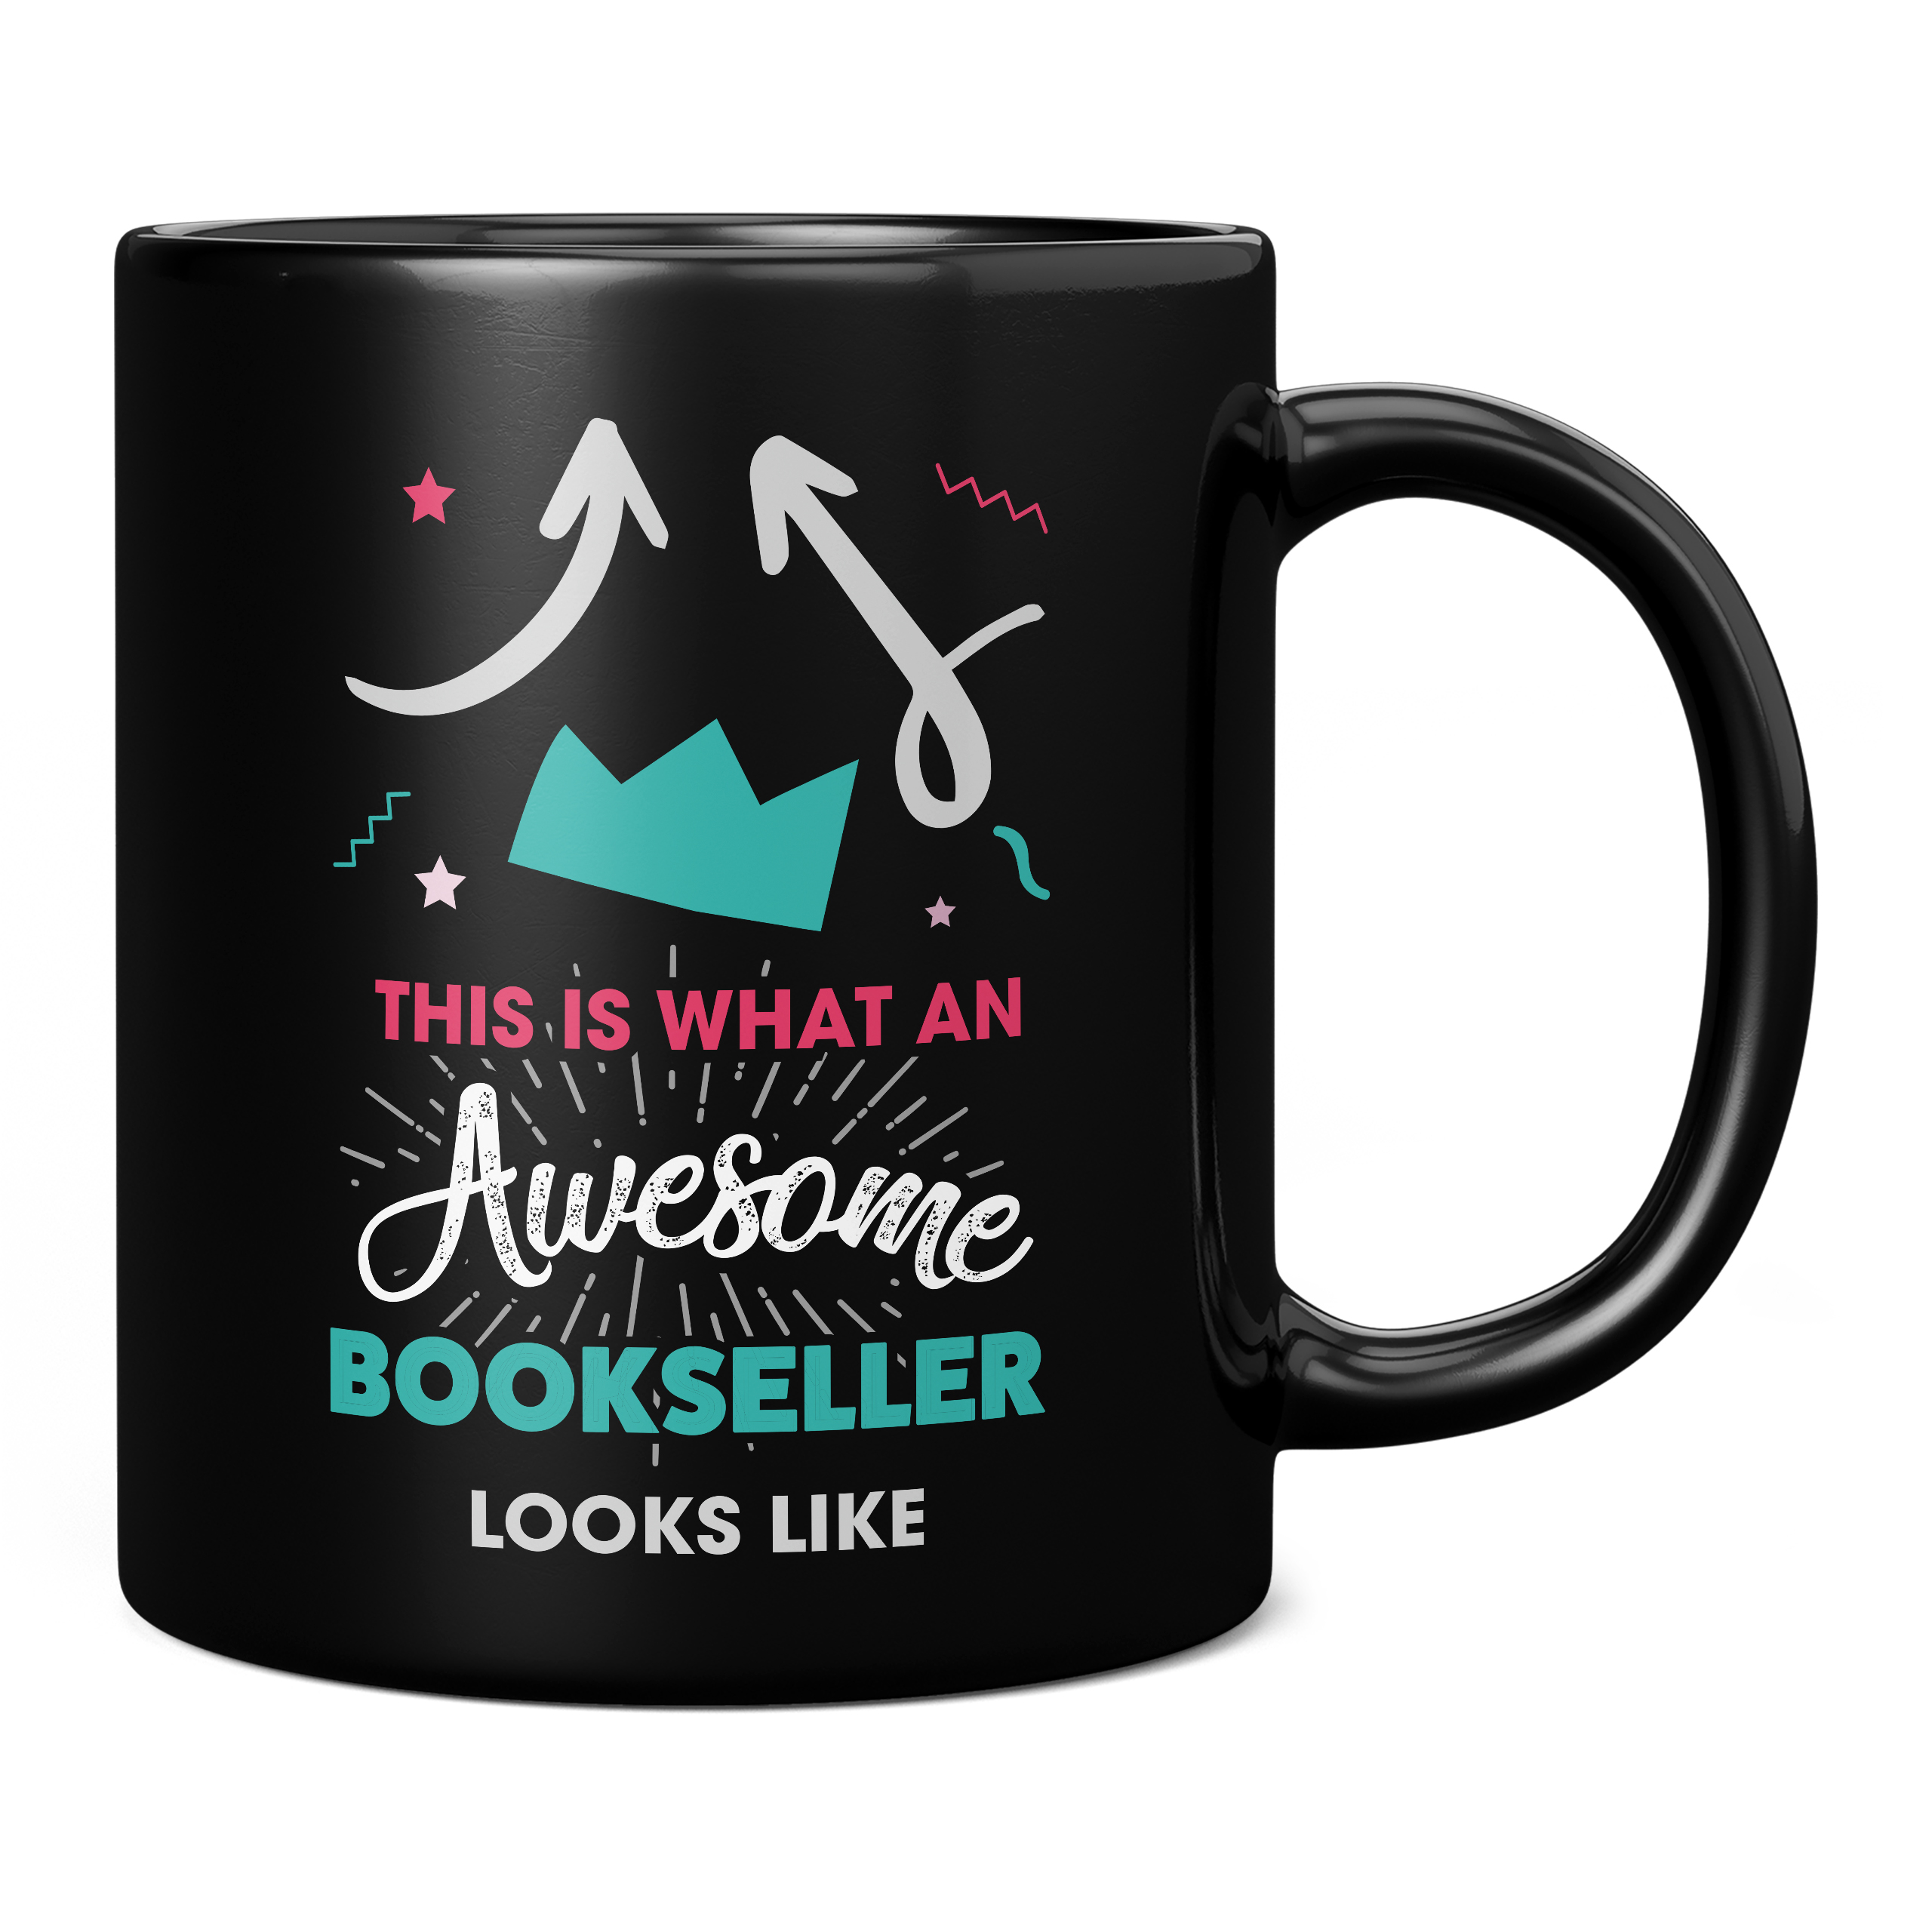 THIS IS WHAT AN AWESOME BOOKSELLER LOOKS LIKE 11OZ NOVELTY MUG